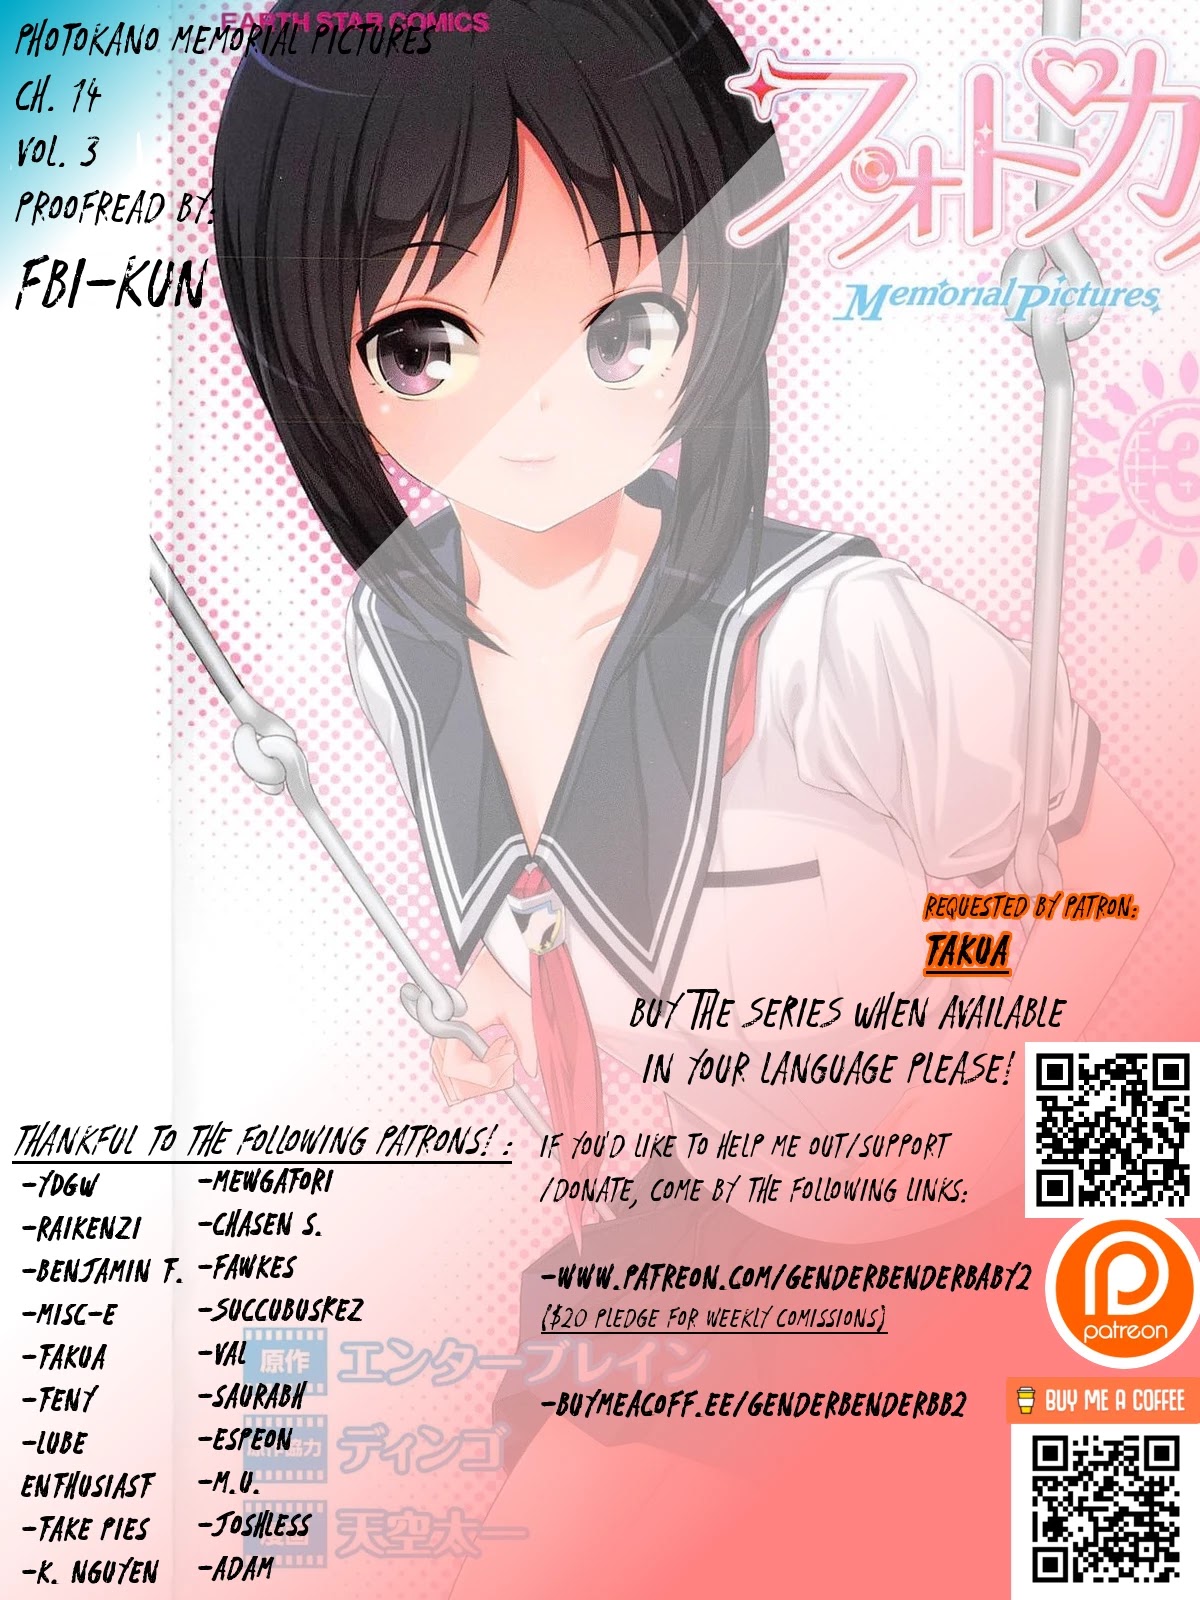 Photo Kano - Memorial Pictures Chapter 14 #4